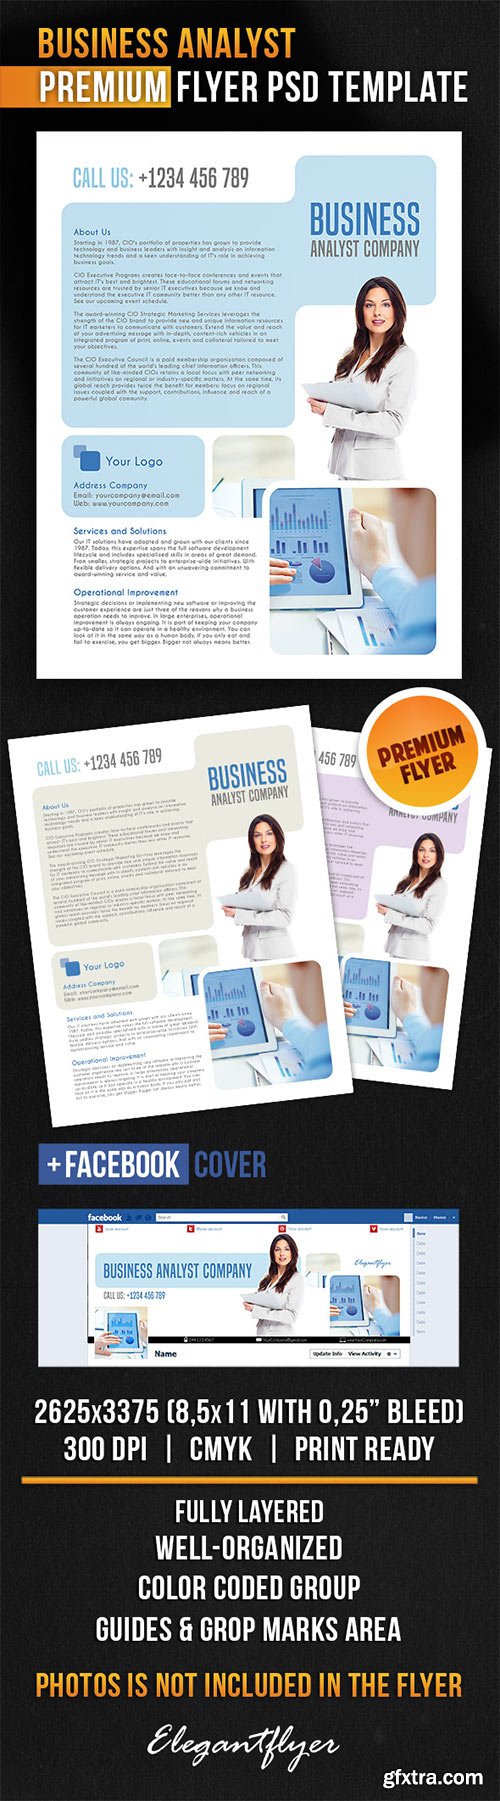 Business Analyst Flyer PSD Template + Facebook Cover